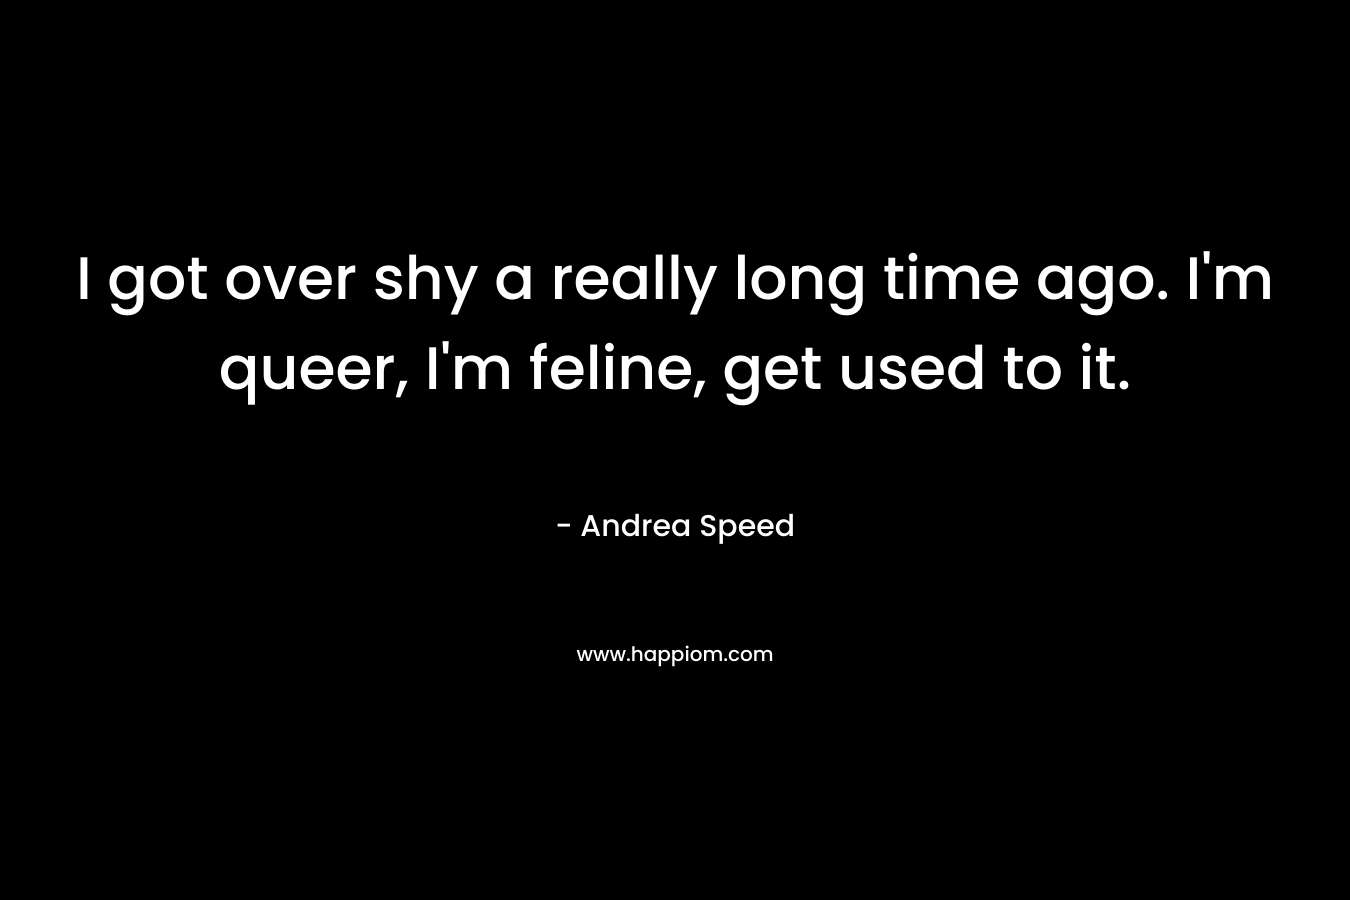 I got over shy a really long time ago. I’m queer, I’m feline, get used to it. – Andrea Speed